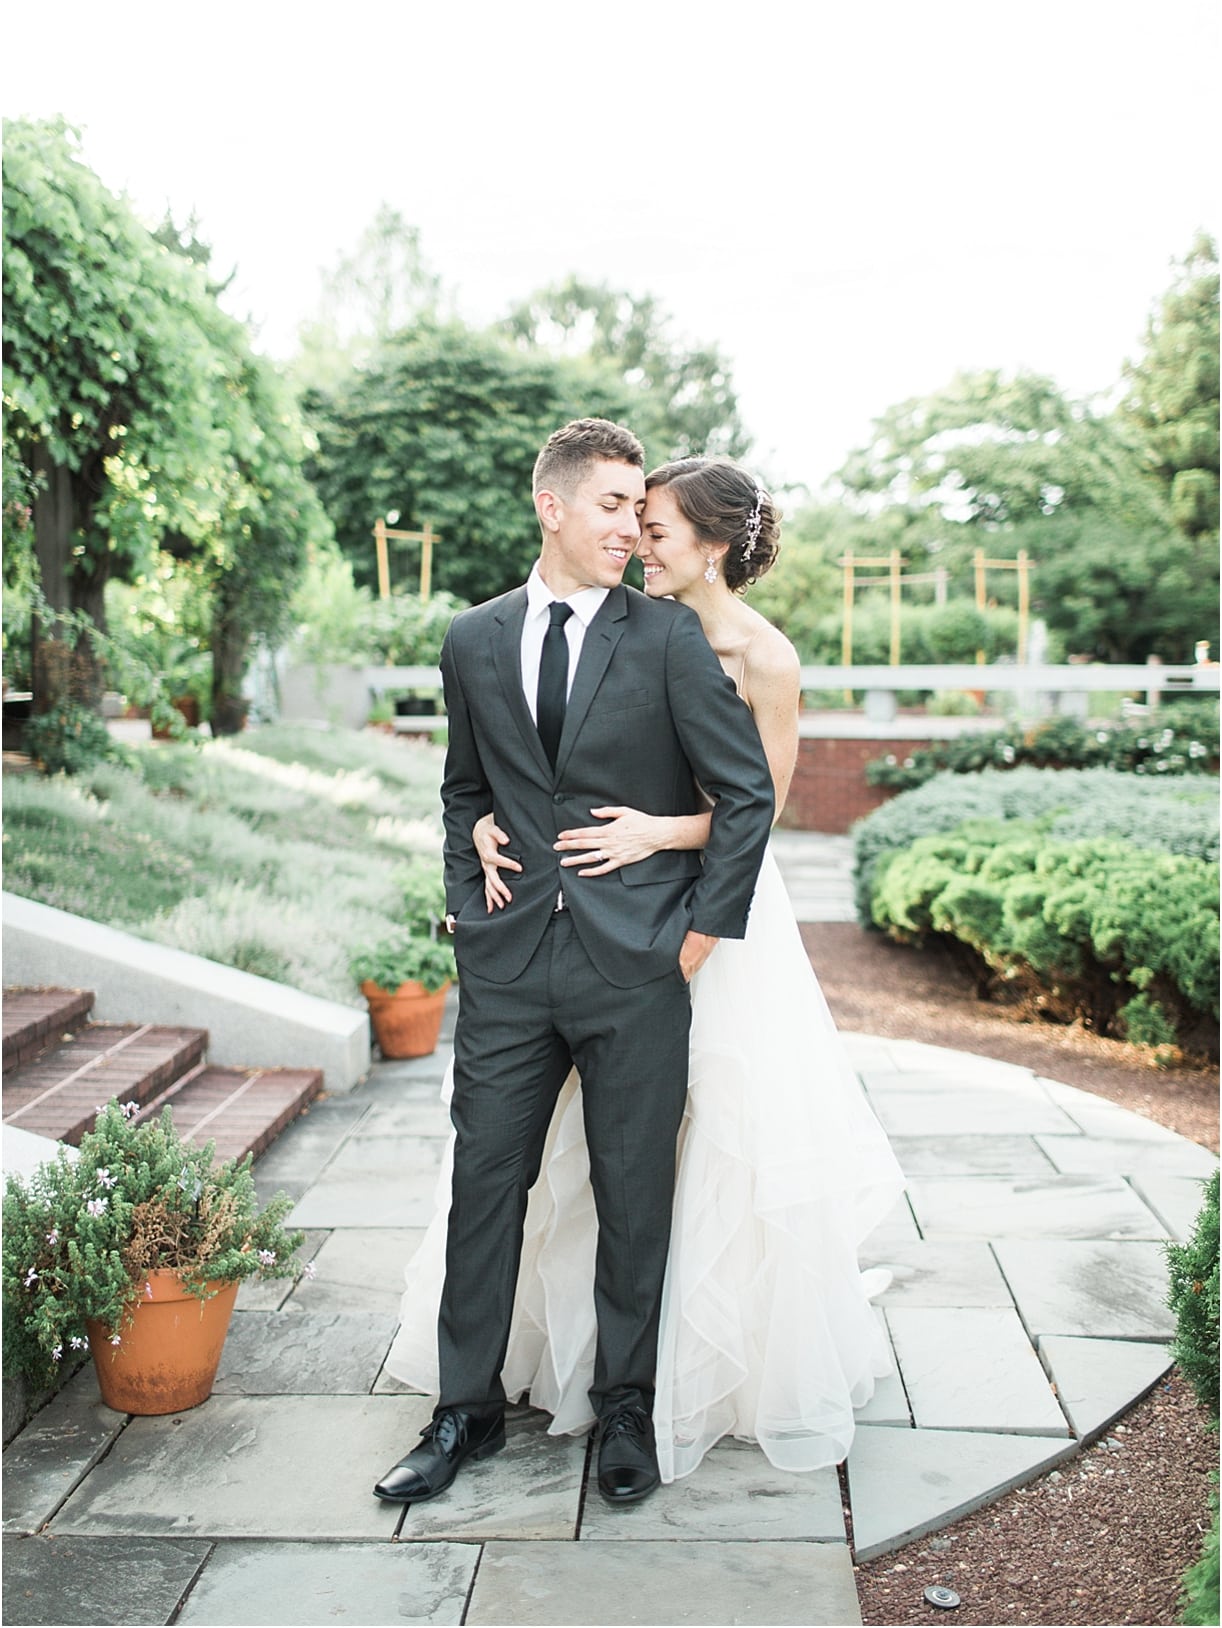 Peach Inspired Wedding Inspiration at the Arboretum Groom First Look